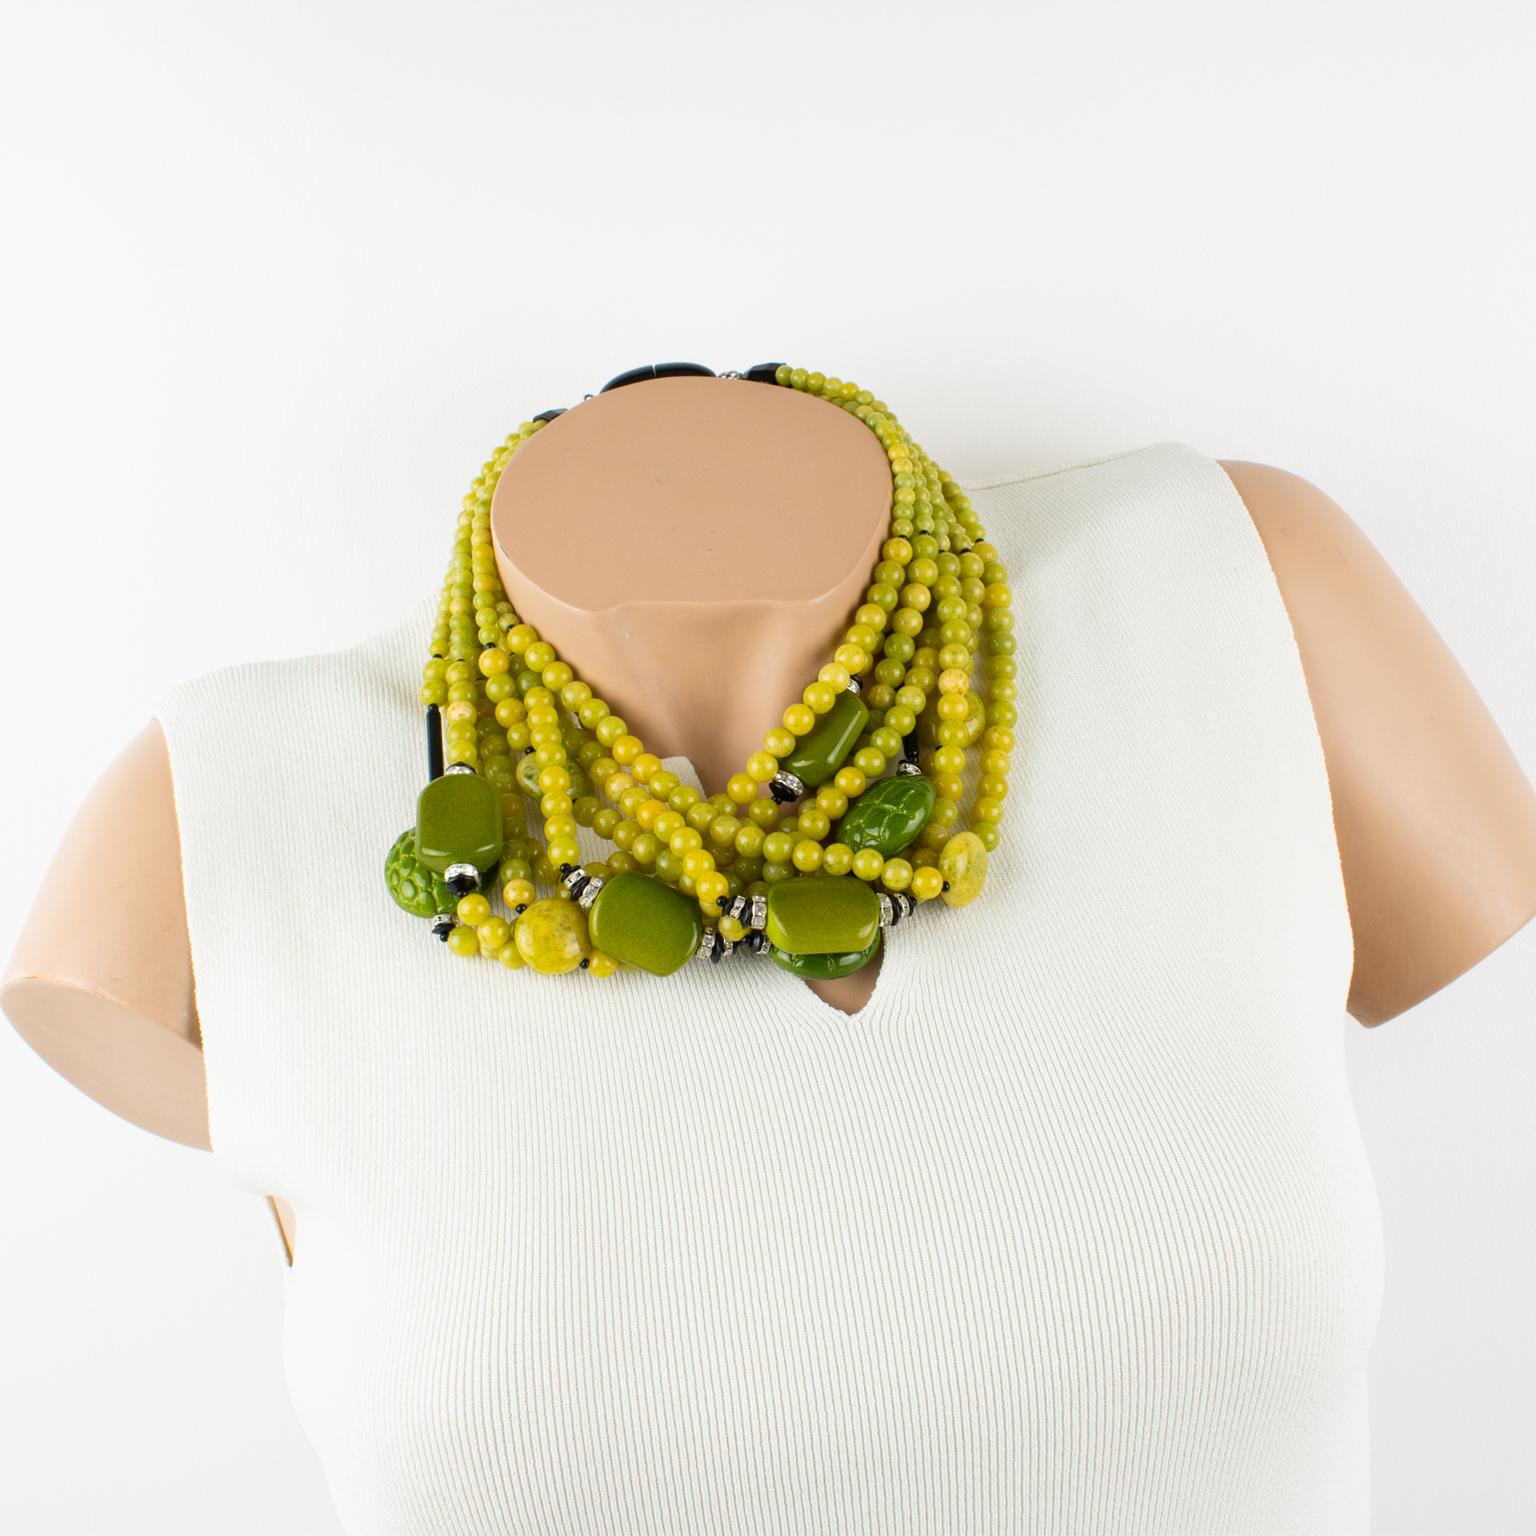 Superb Angela Caputi, made in Italy resin choker beaded necklace. Oversized multi-strand design with dominant faux jade color contrasted with avocado green, and army green resin pebbles beads, compliment with crystal rhinestones ring spacers. Her